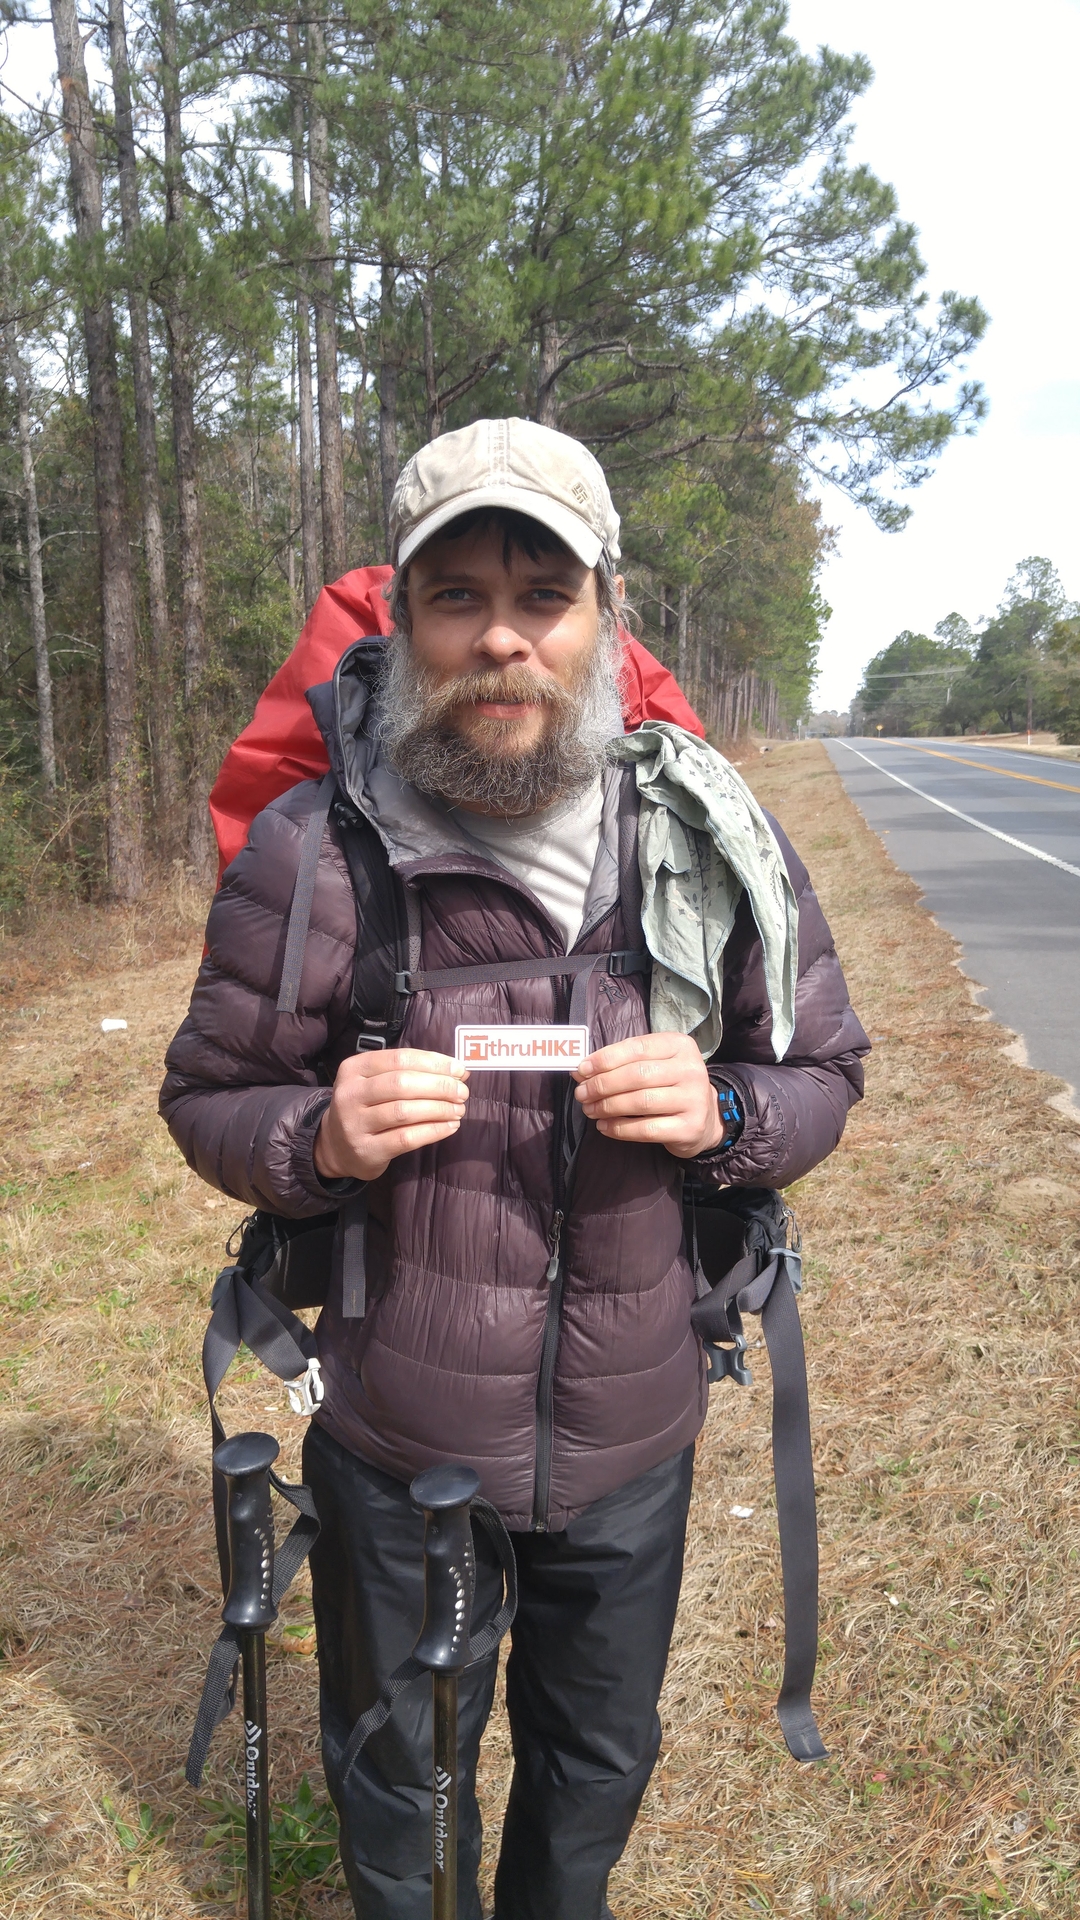 A photo of the hiker who called himself "Mostly Harmless"